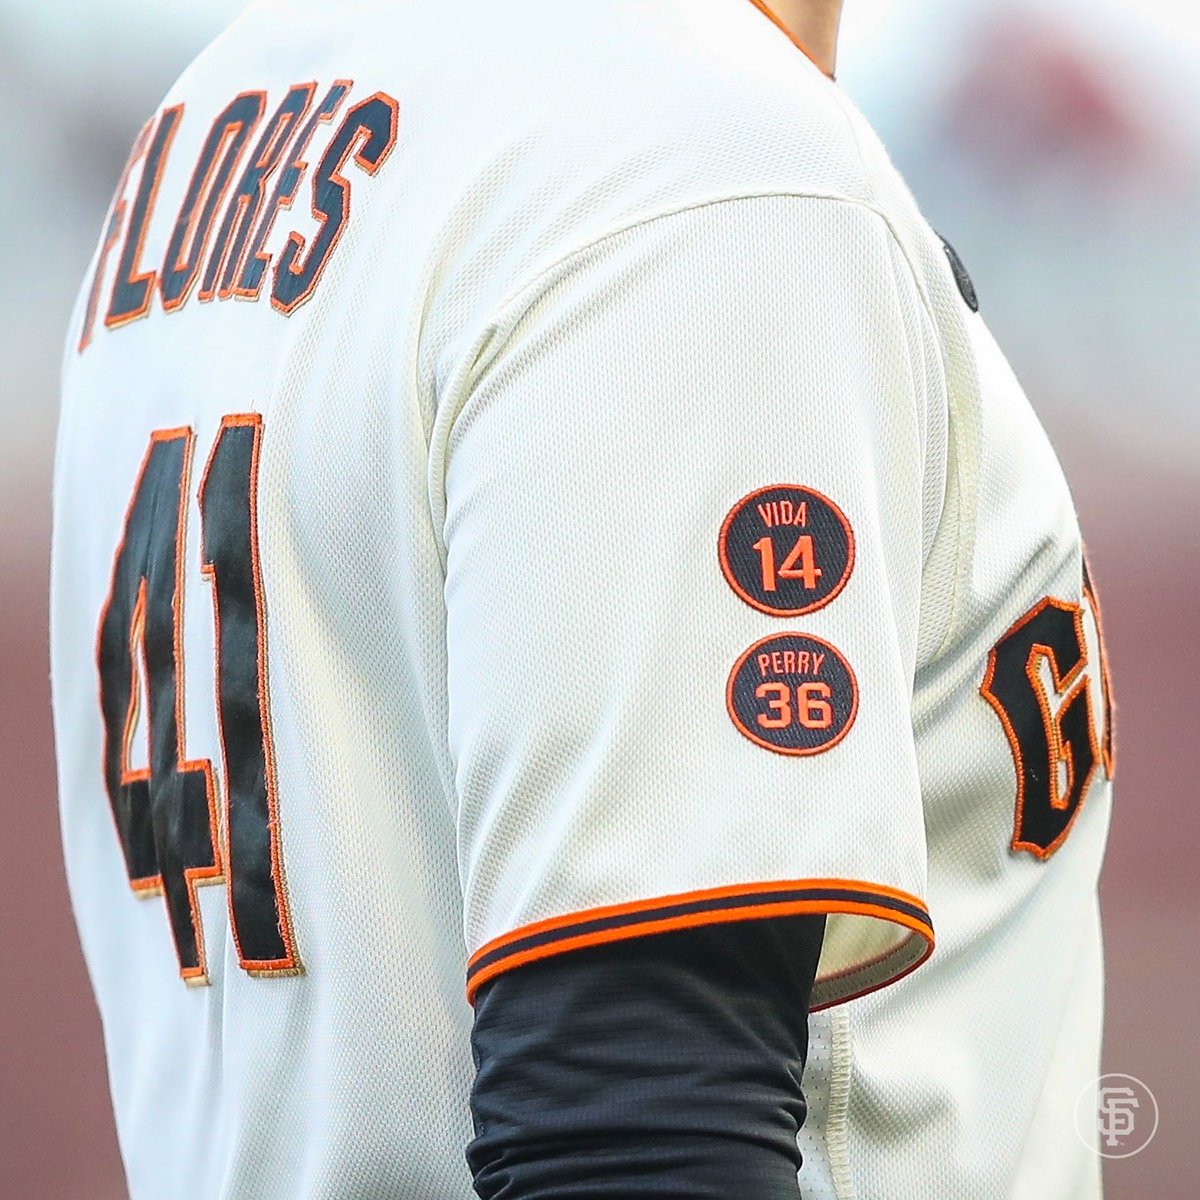 SFGiants on X: For the remainder of the season, the #SFGiants will wear a  #14 jersey patch in honor of Vida Blue's contributions to our community and  the game we all love.